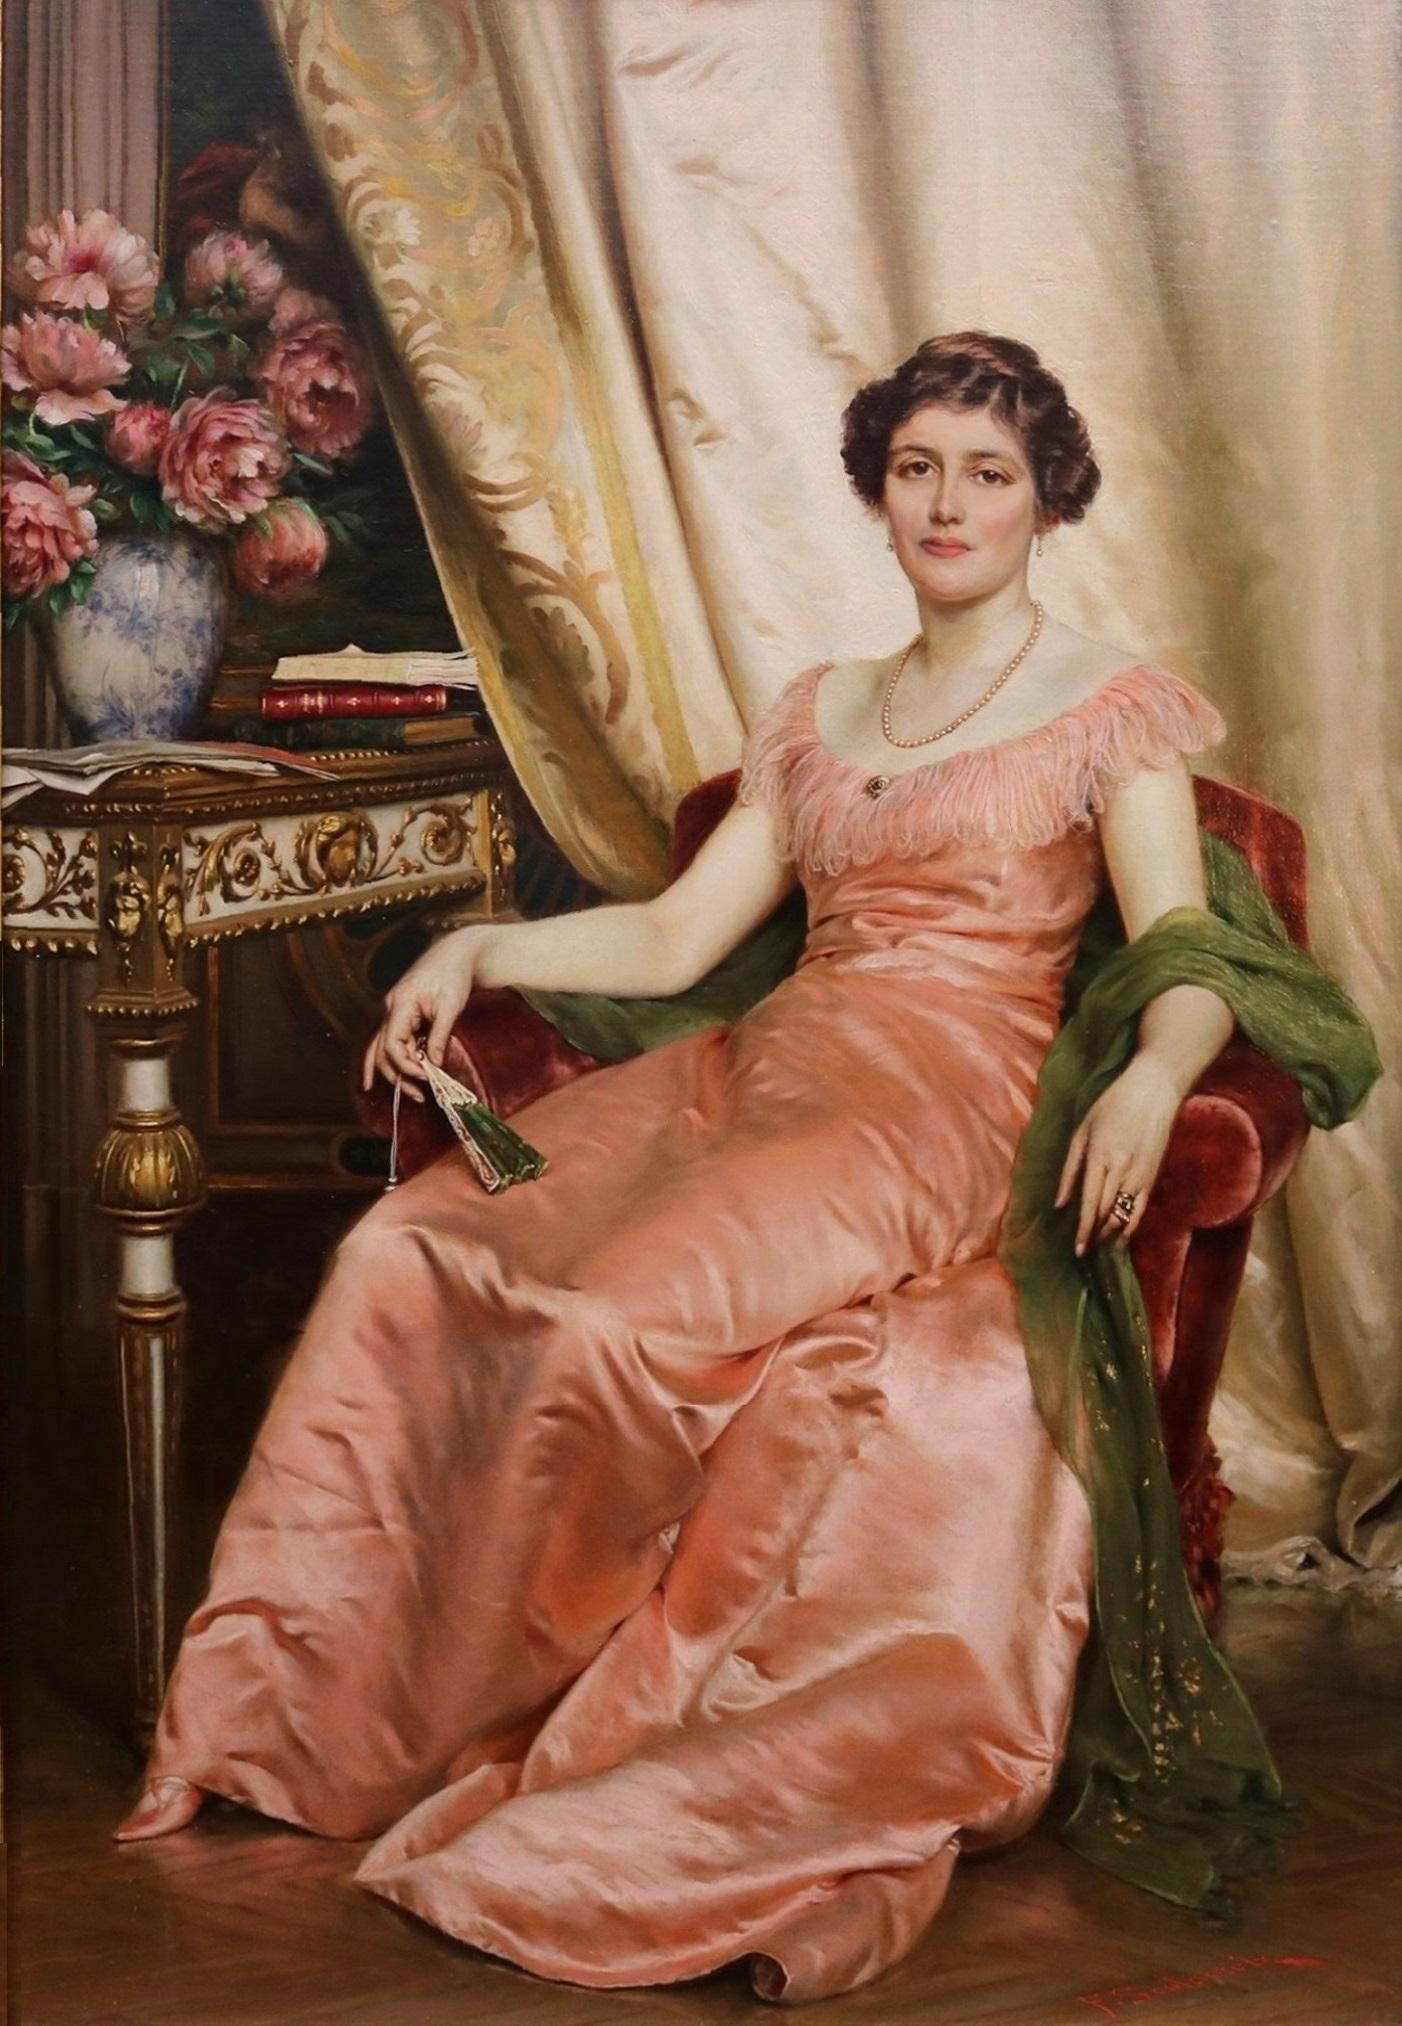 ‘Regina dei Fiori’ by Frédéric Soulacroix (1858-1933). 

The painting – which depicts an aristocratic Italian beauty sitting beside a porcelain vase full of peonies – is signed by the artist and presented in a superb quality hand-carved giltwood